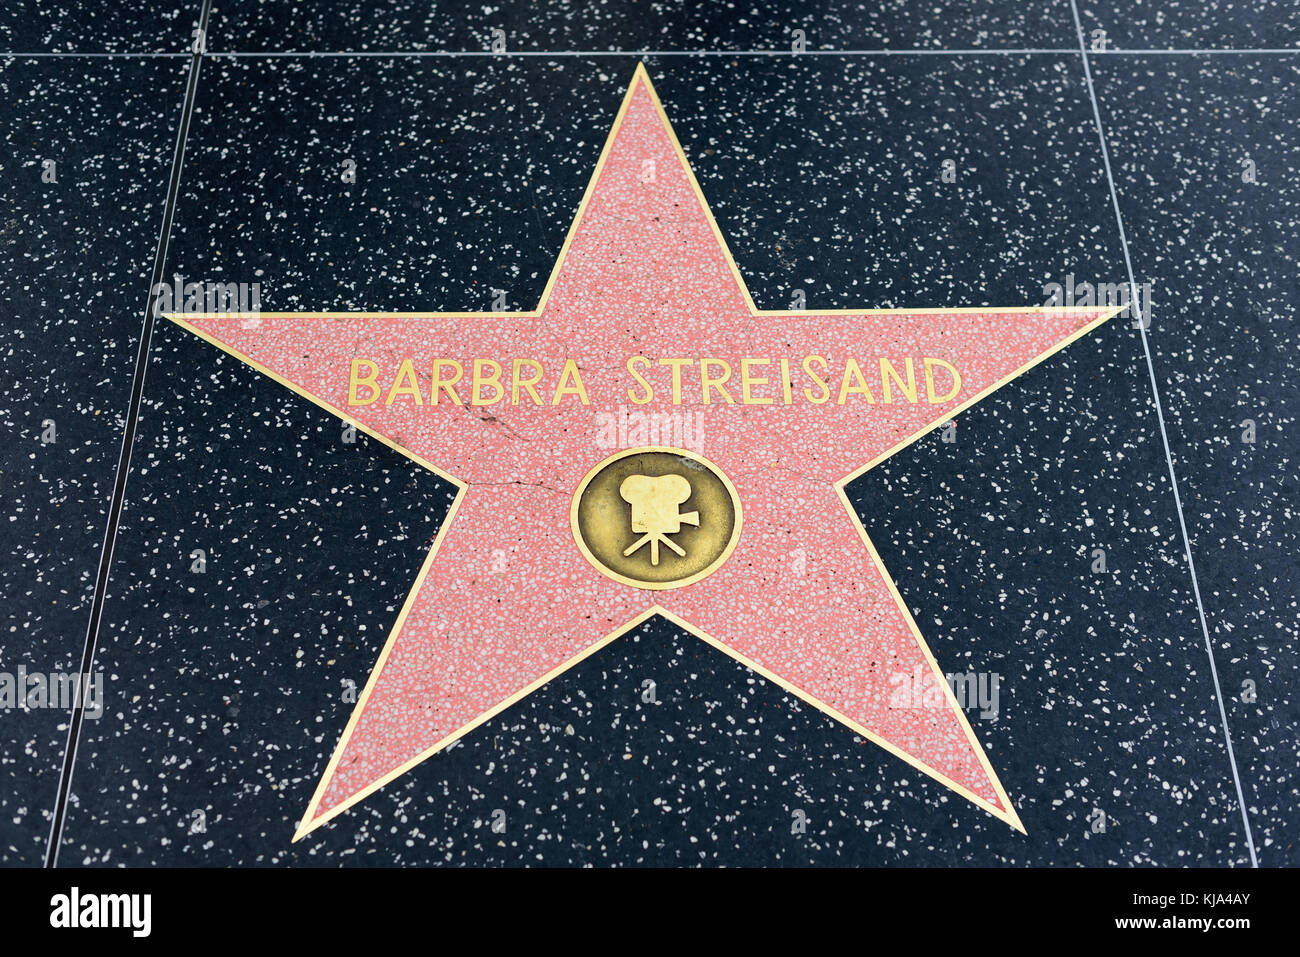 HOLLYWOOD, CA - DECEMBER 06: Barbra Streisand star on the Hollywood Walk of Fame in Hollywood, California on Dec. 6, 2016. Stock Photo